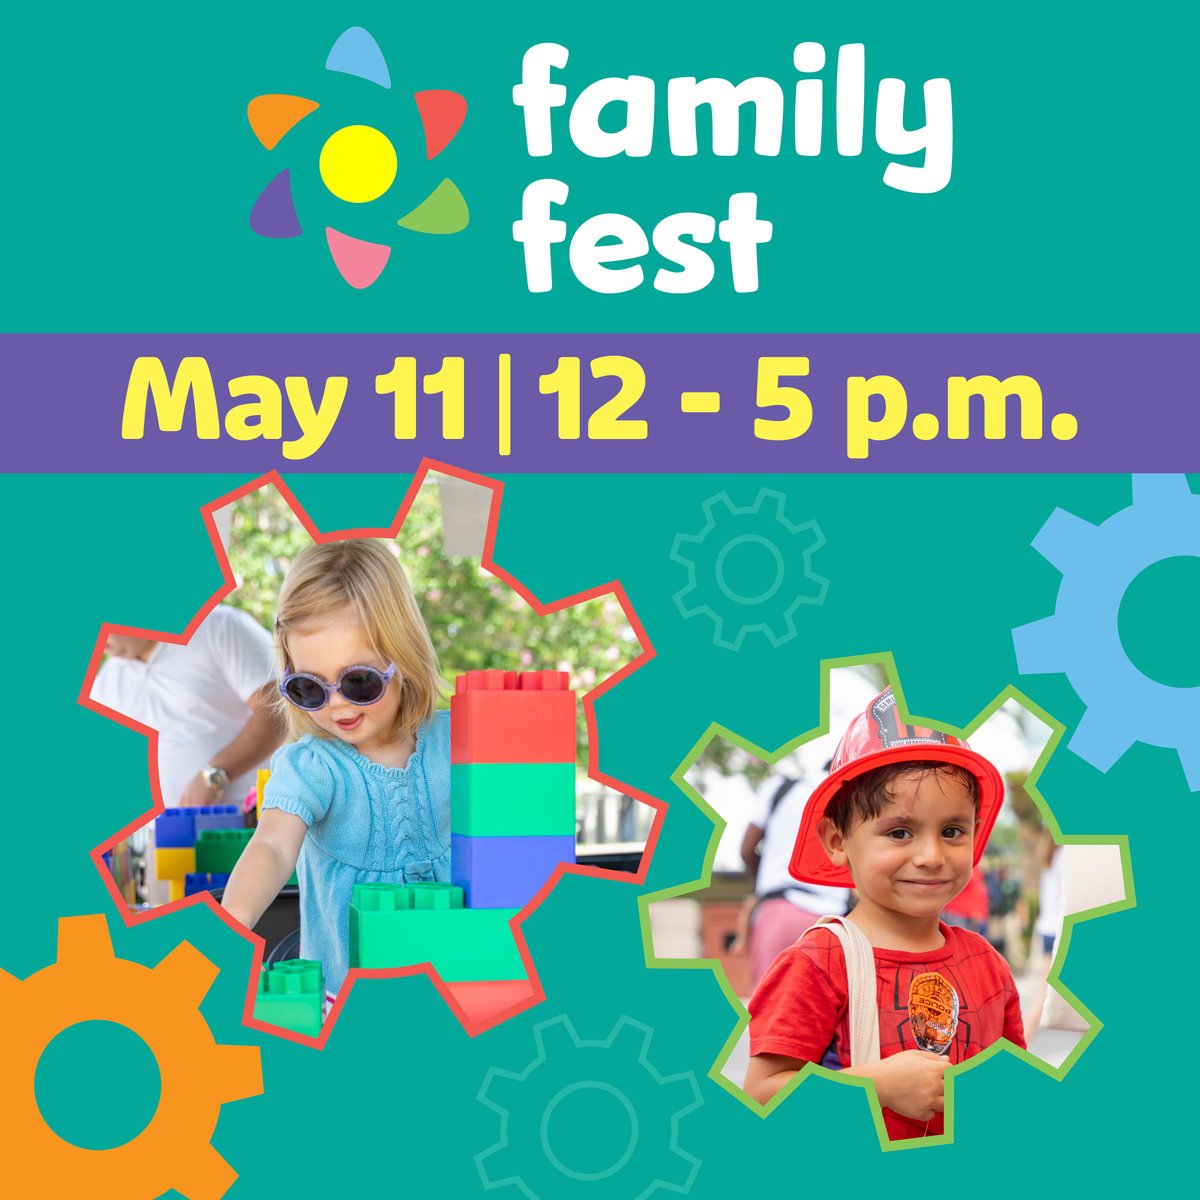 Get ready for a day of family fun at #FamilyFest! Let your kids rule the day at #CranesRoostPark on May 11 from 12 to 5 p.m. From exploring to creating, there's something for every little adventurer and artist. Don't miss out! Learn more: ow.ly/NcM550RlB9B #LiveAltamonte